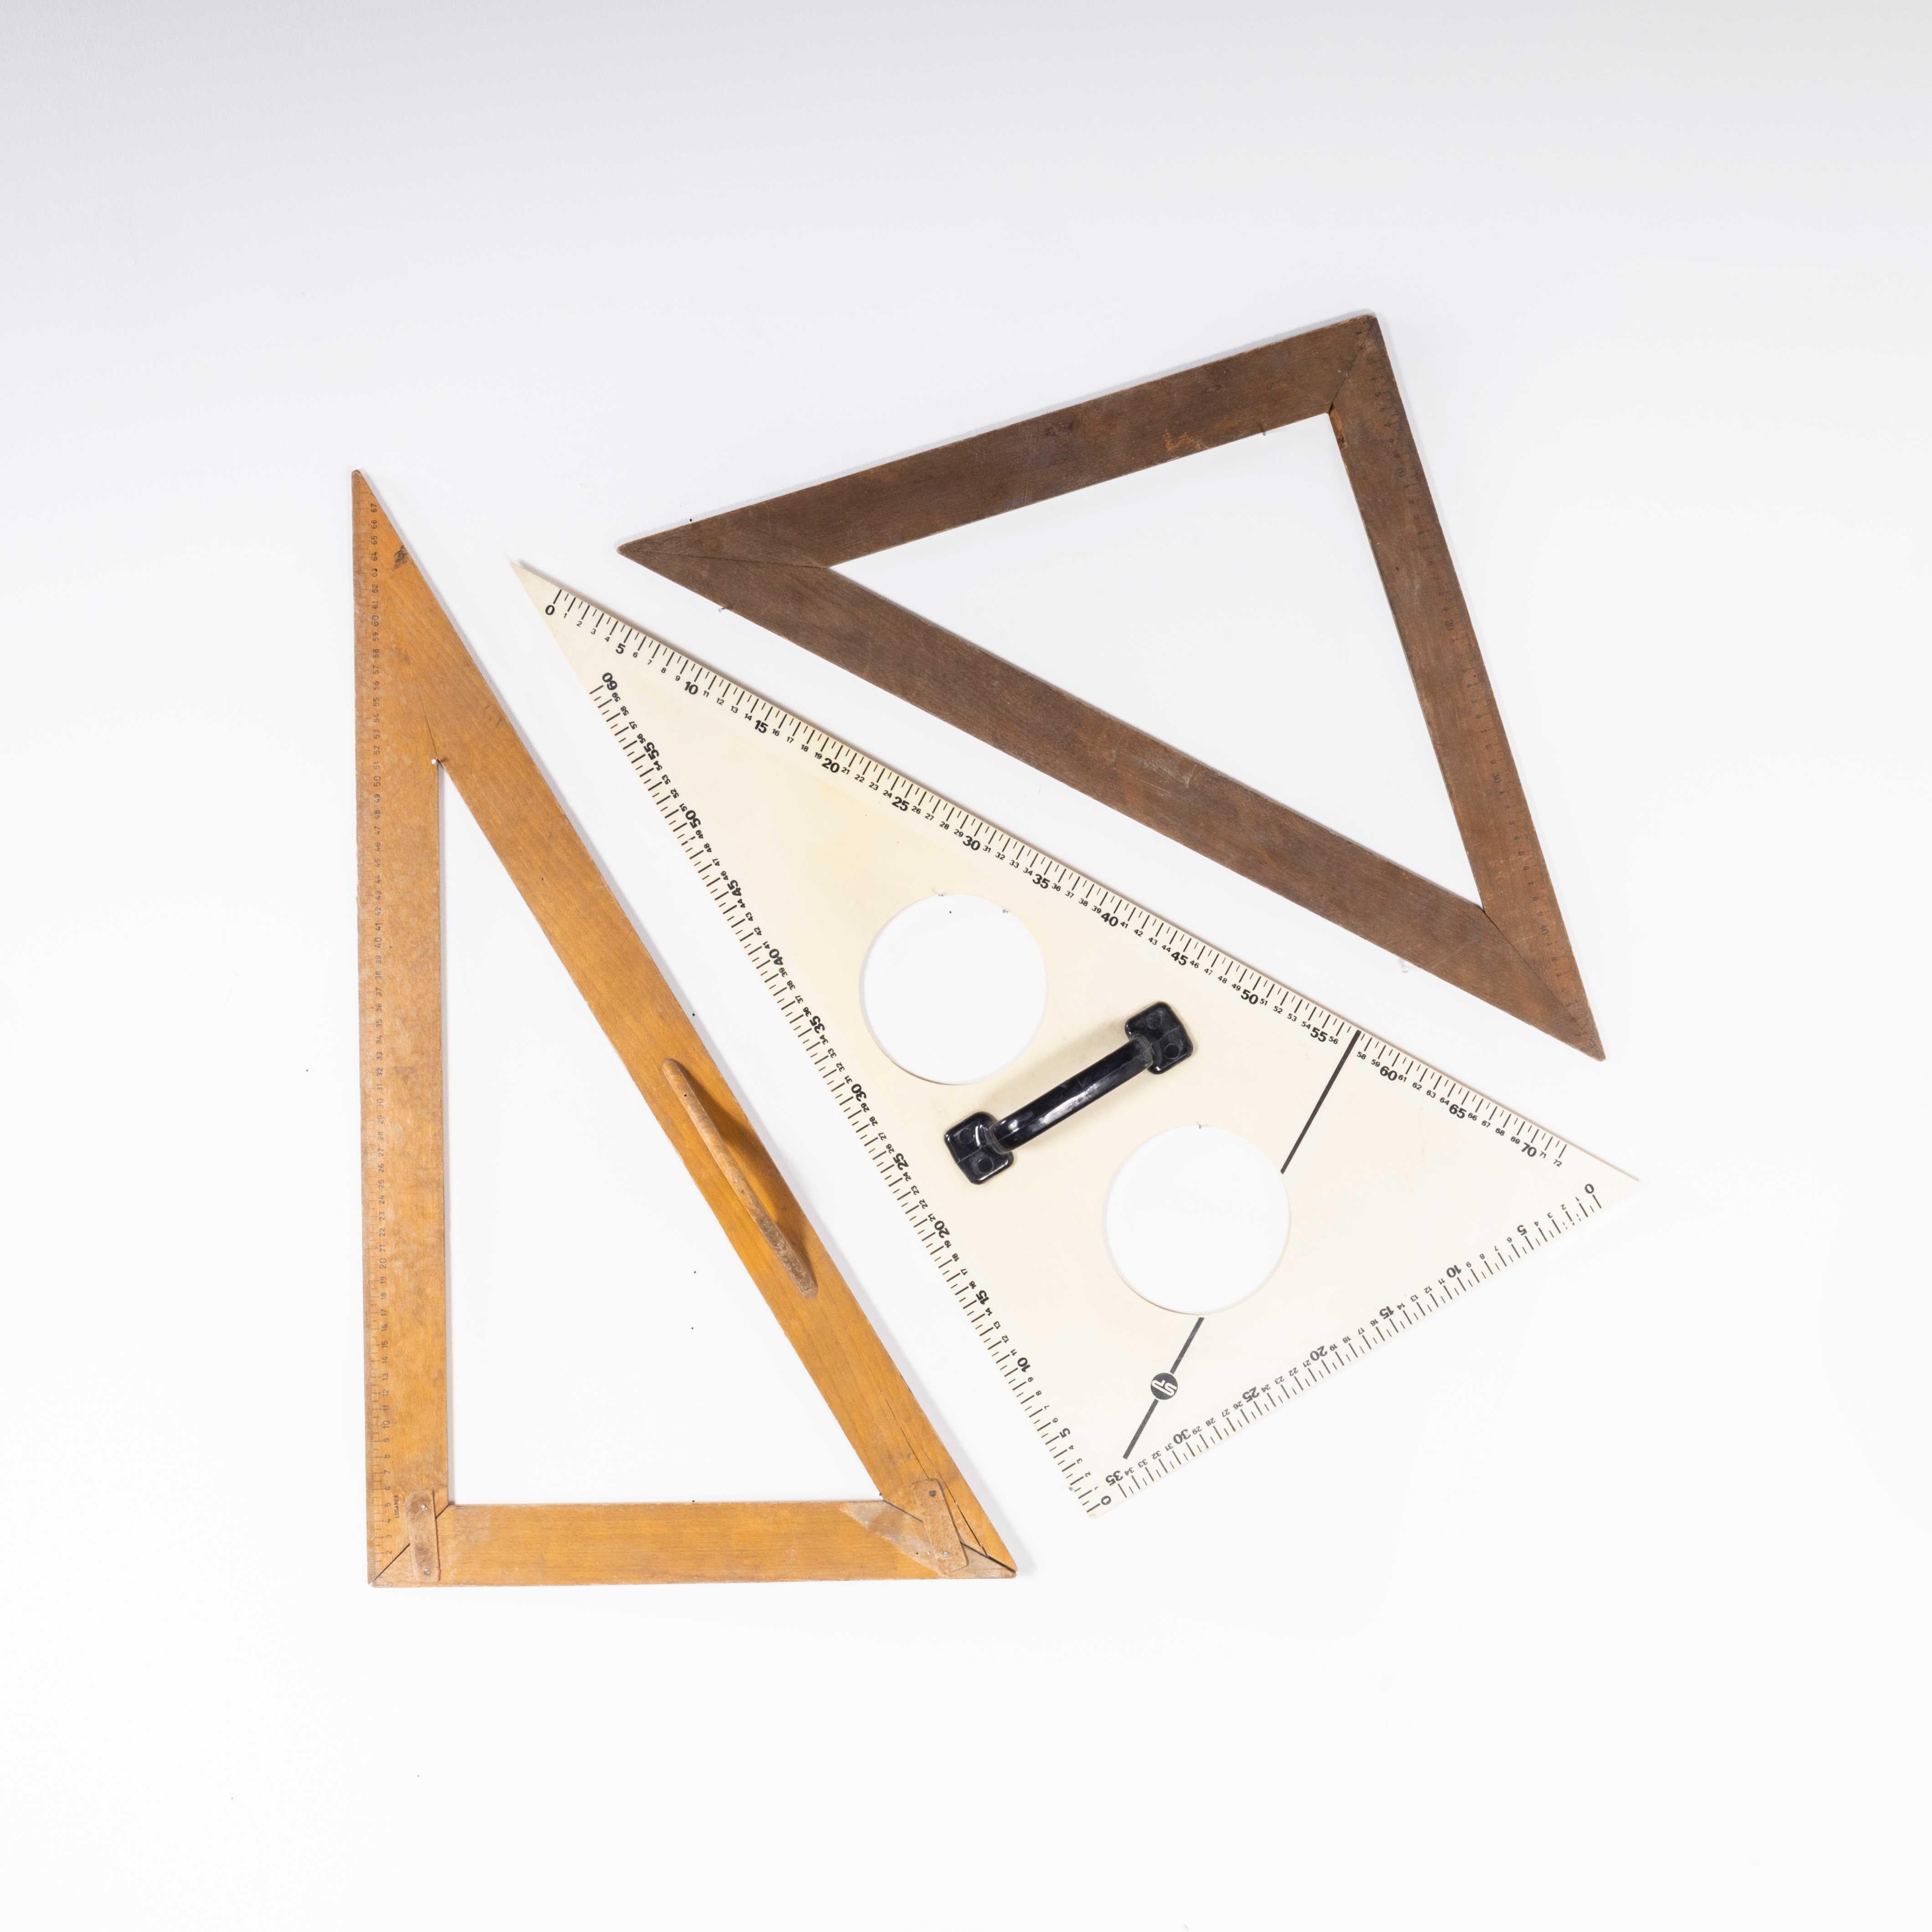 Three oversize teaching – blackboard triangles
Three oversize teaching – blackboard triangles. Set Of three triangles, two wood and one semi flexible off white acrylic for blackboard use. Large triangle 80 L x 40 W all cm.

Workshop report
Our